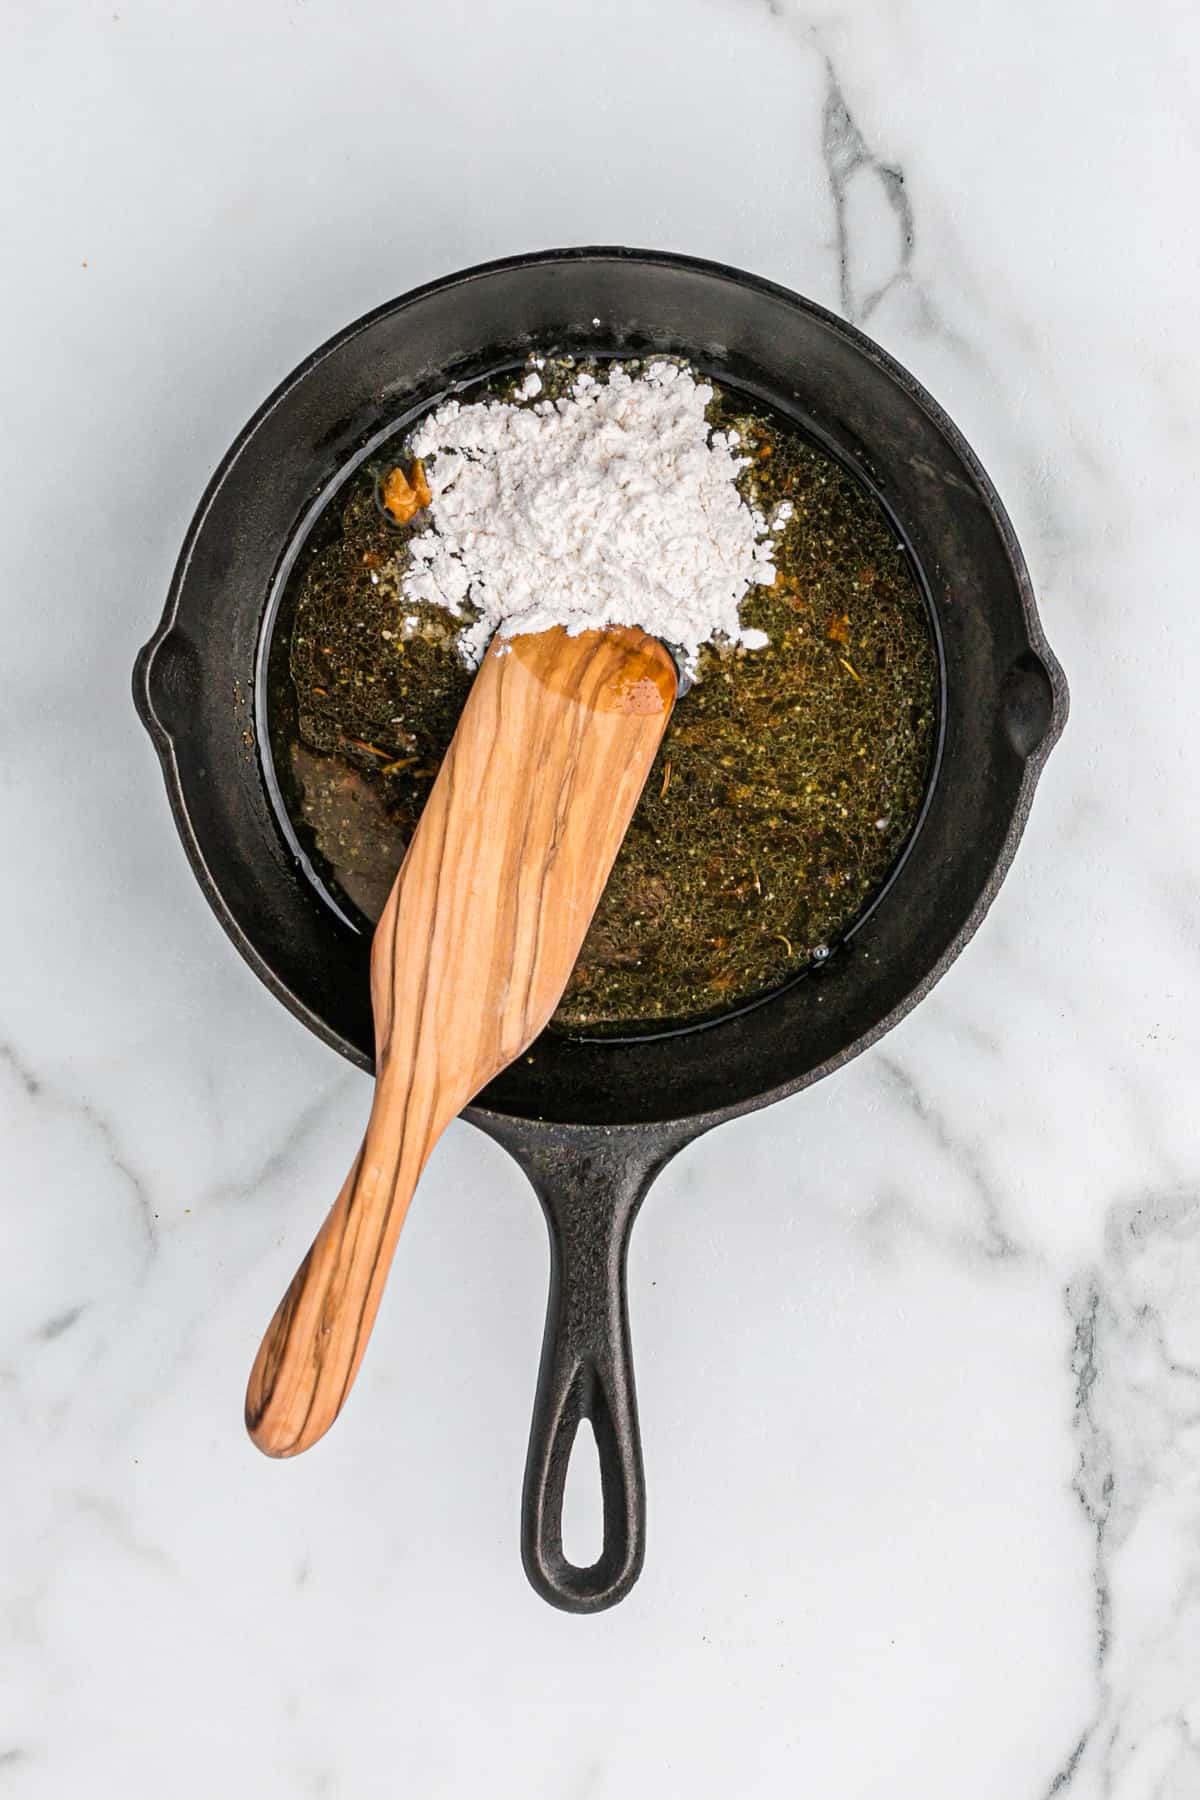 A wooden spoon stirring flour into melted butter in a cast iron skillet.